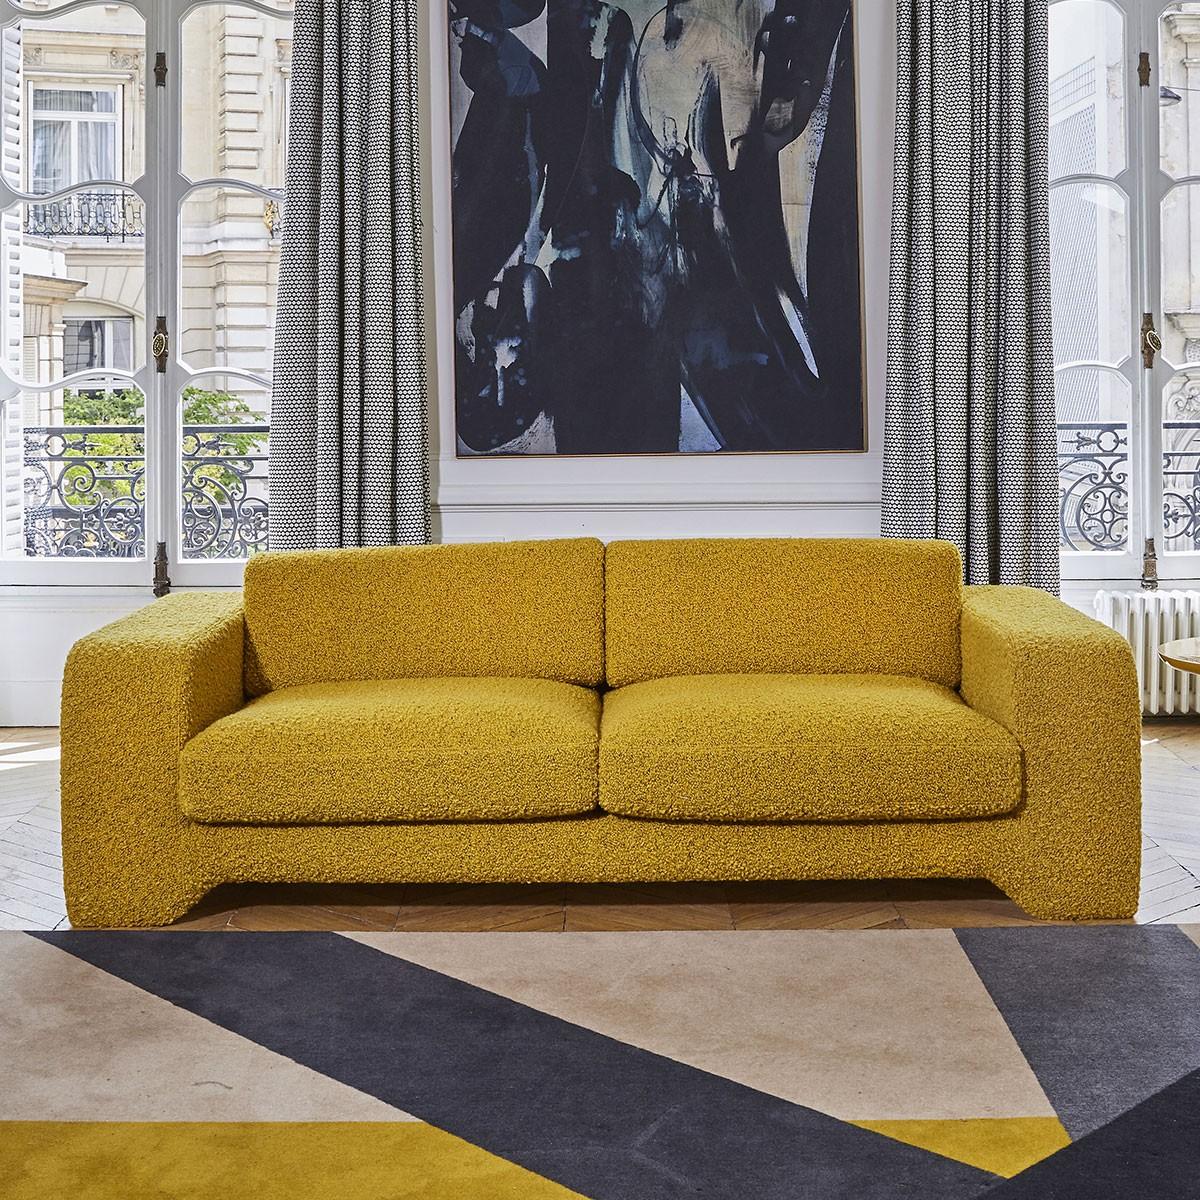 Popus Editions Giovanna 2.5 seater sofa in orange Verone velvet upholstery.

Giovanna is a sofa with a strong profile. A sober, plush line, with this famous detail that changes everything, so as not to forget its strength of character and this